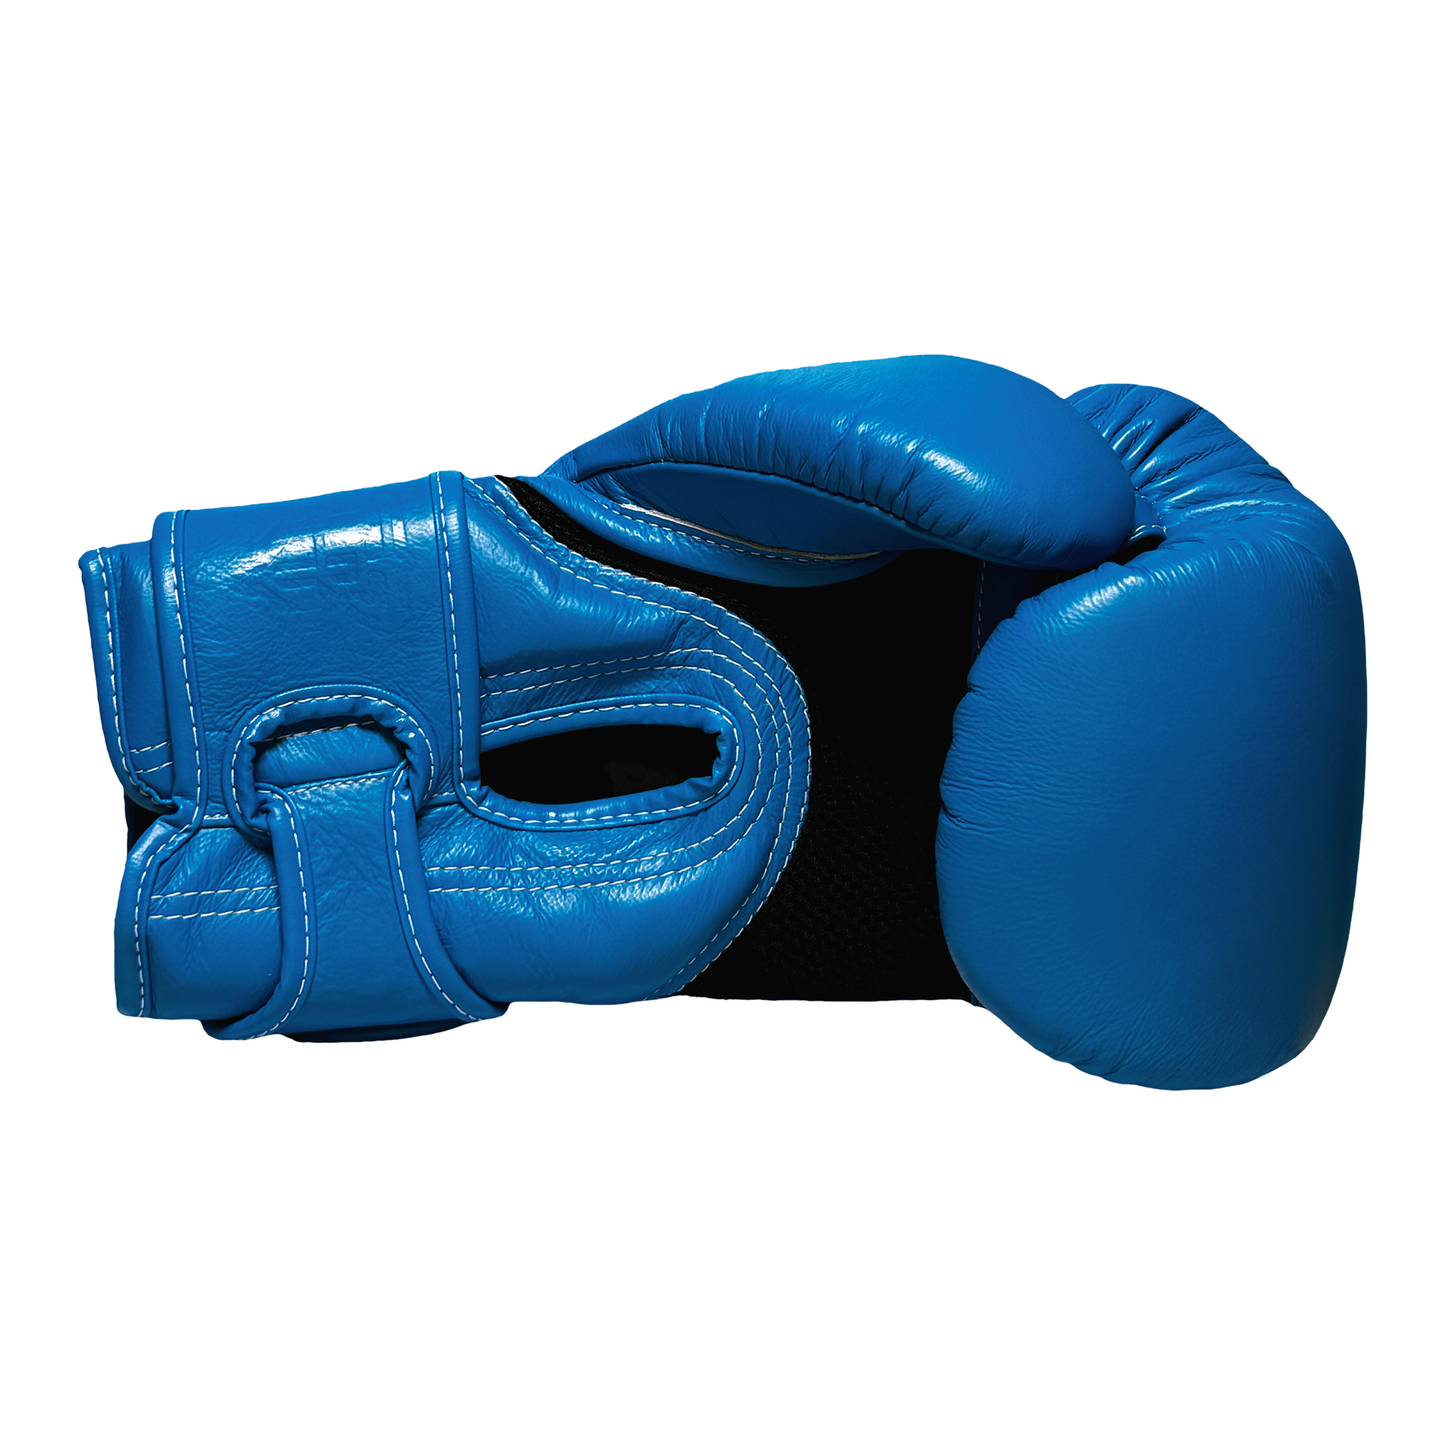 Top King Boxhandschuhe "Double Lock" Neon Blue